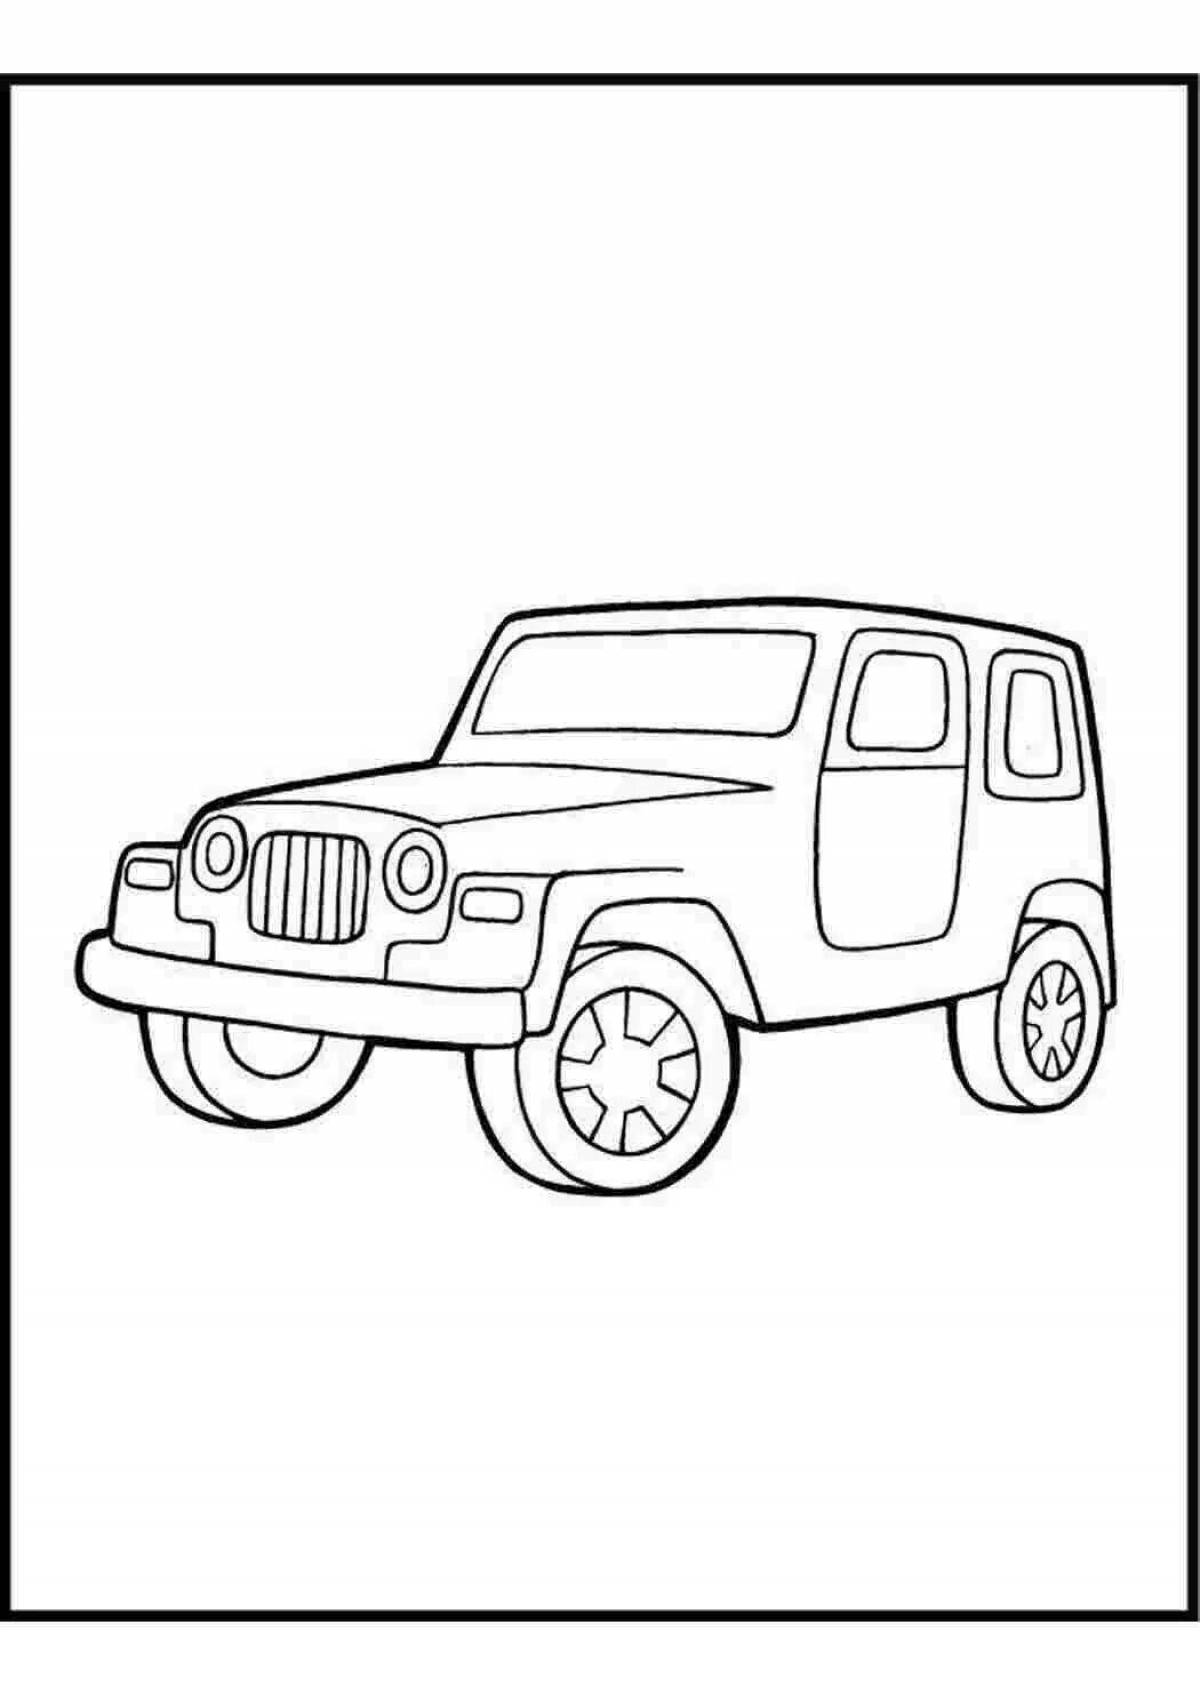 Exquisite UAZ coloring book for kids